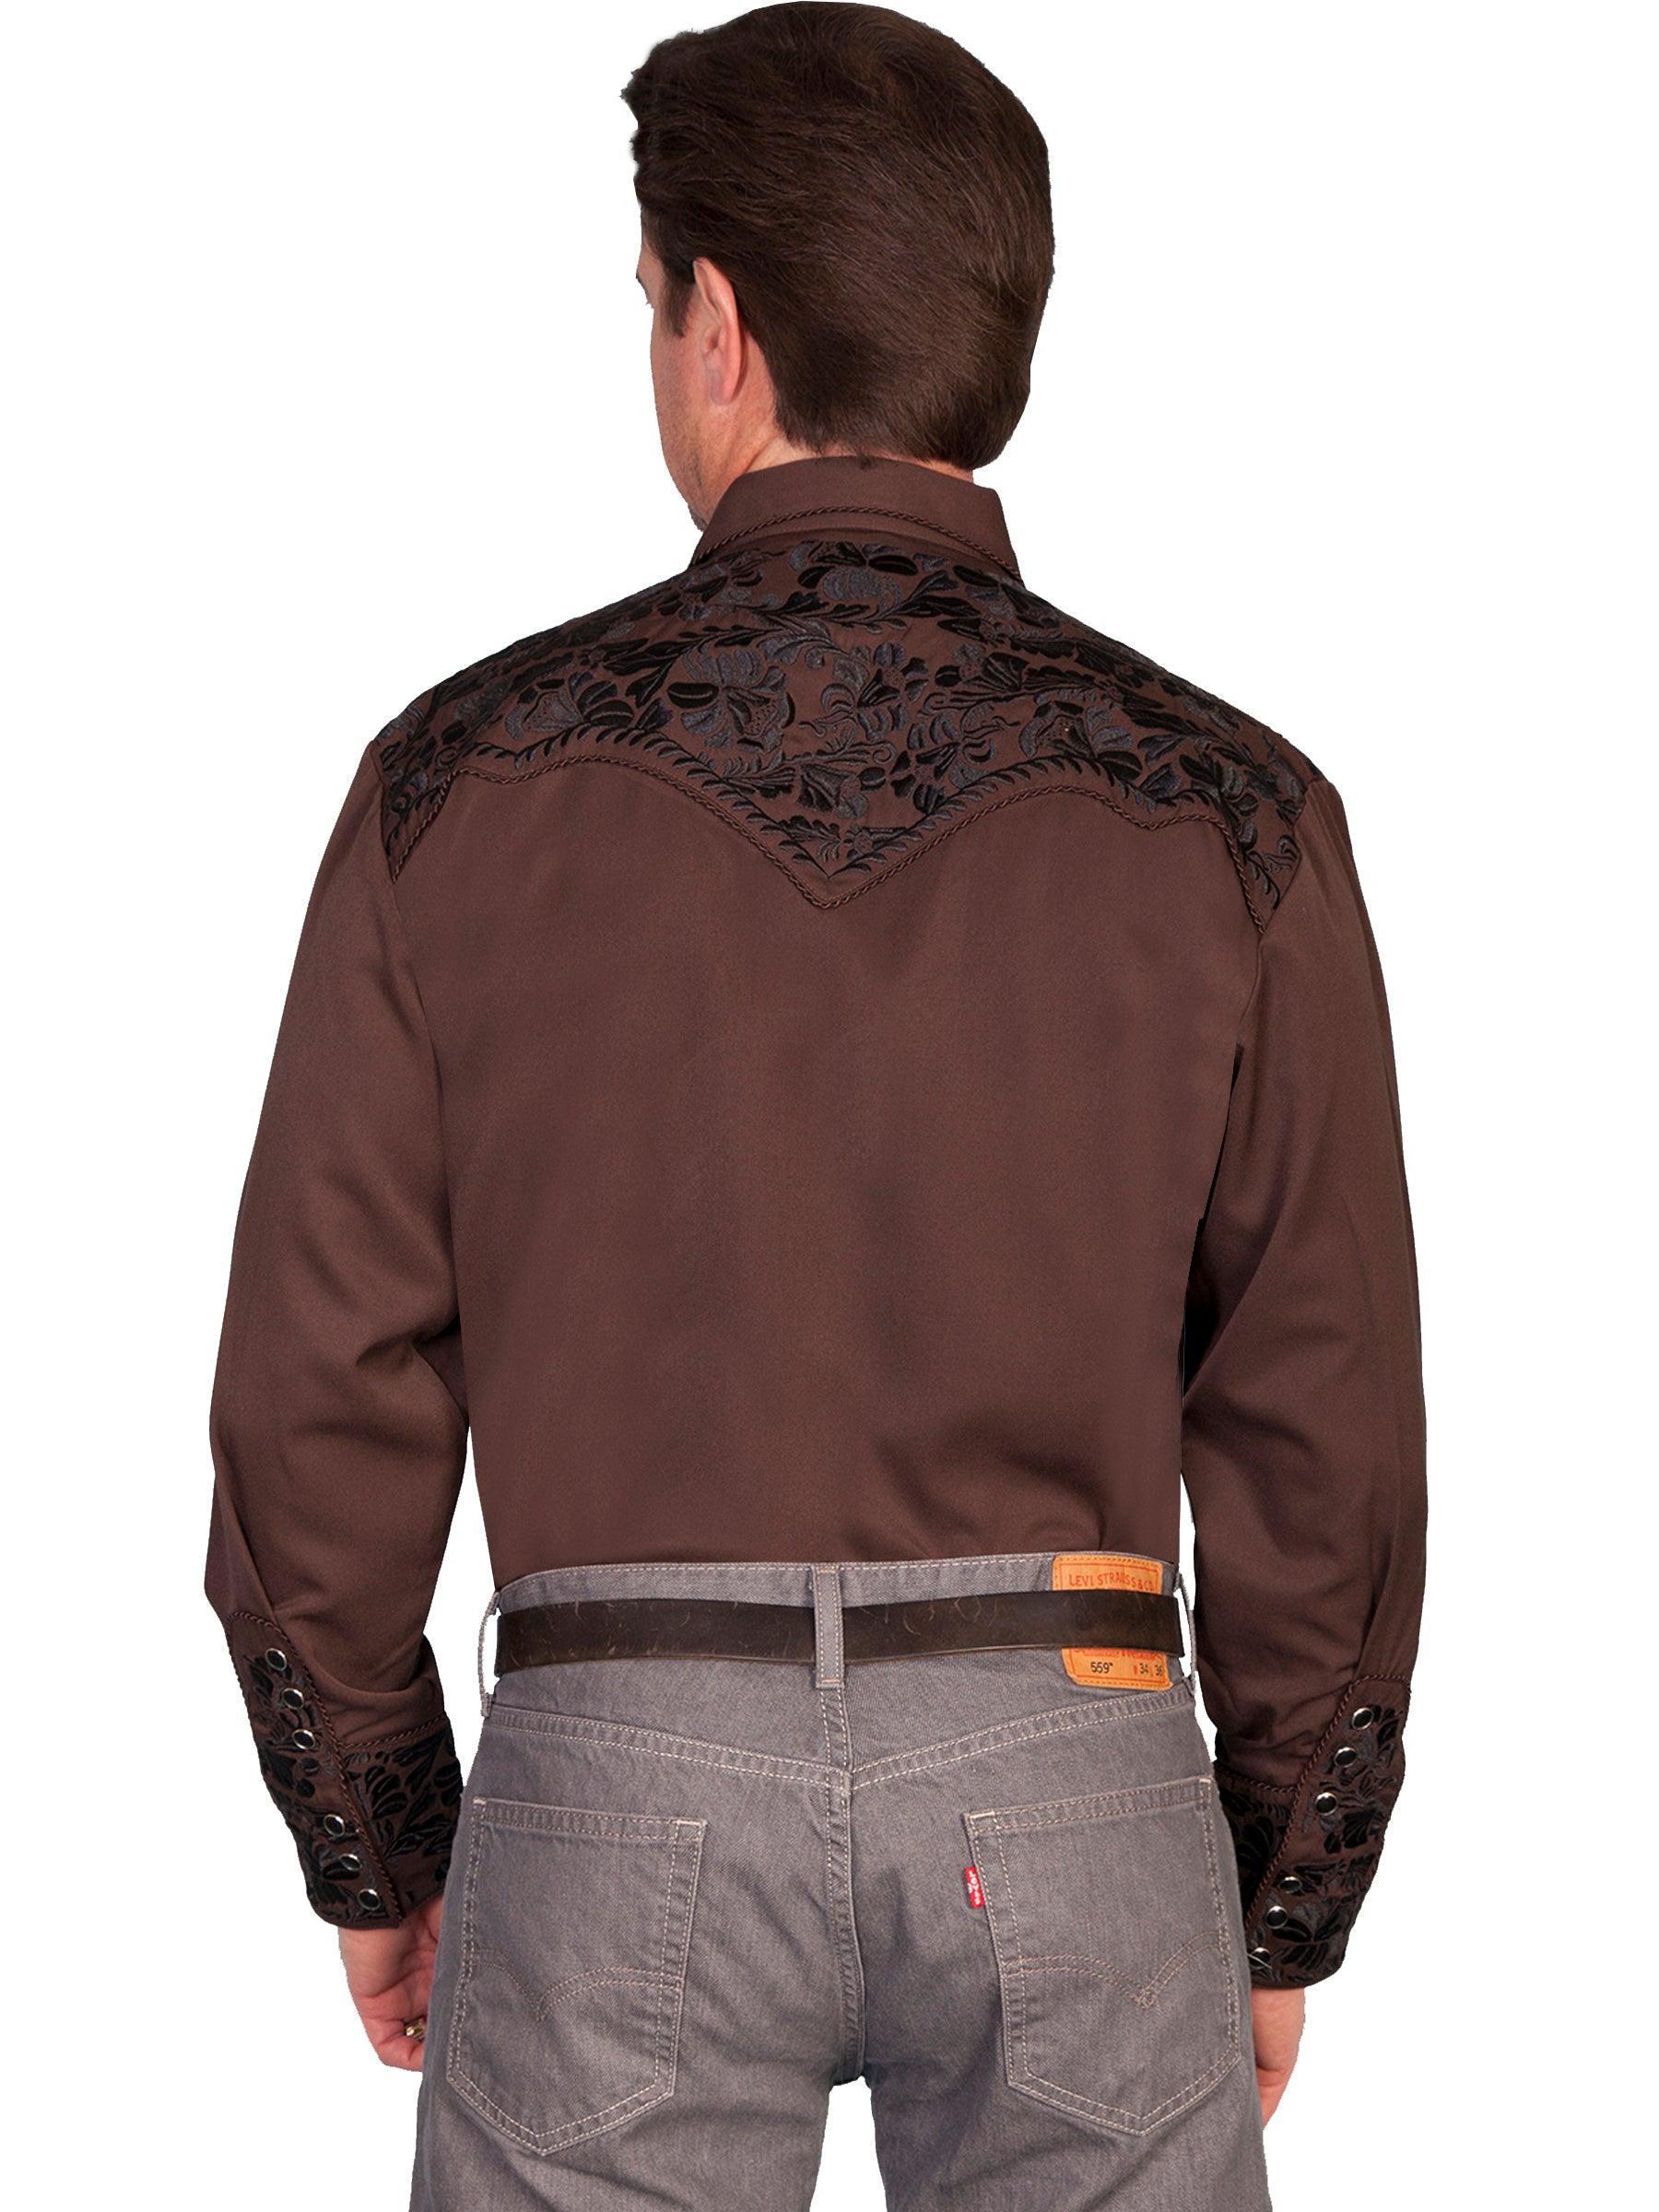 Scully CHOCOLATE FLORAL TOOLED EMBROIDERY SHIRT - Flyclothing LLC